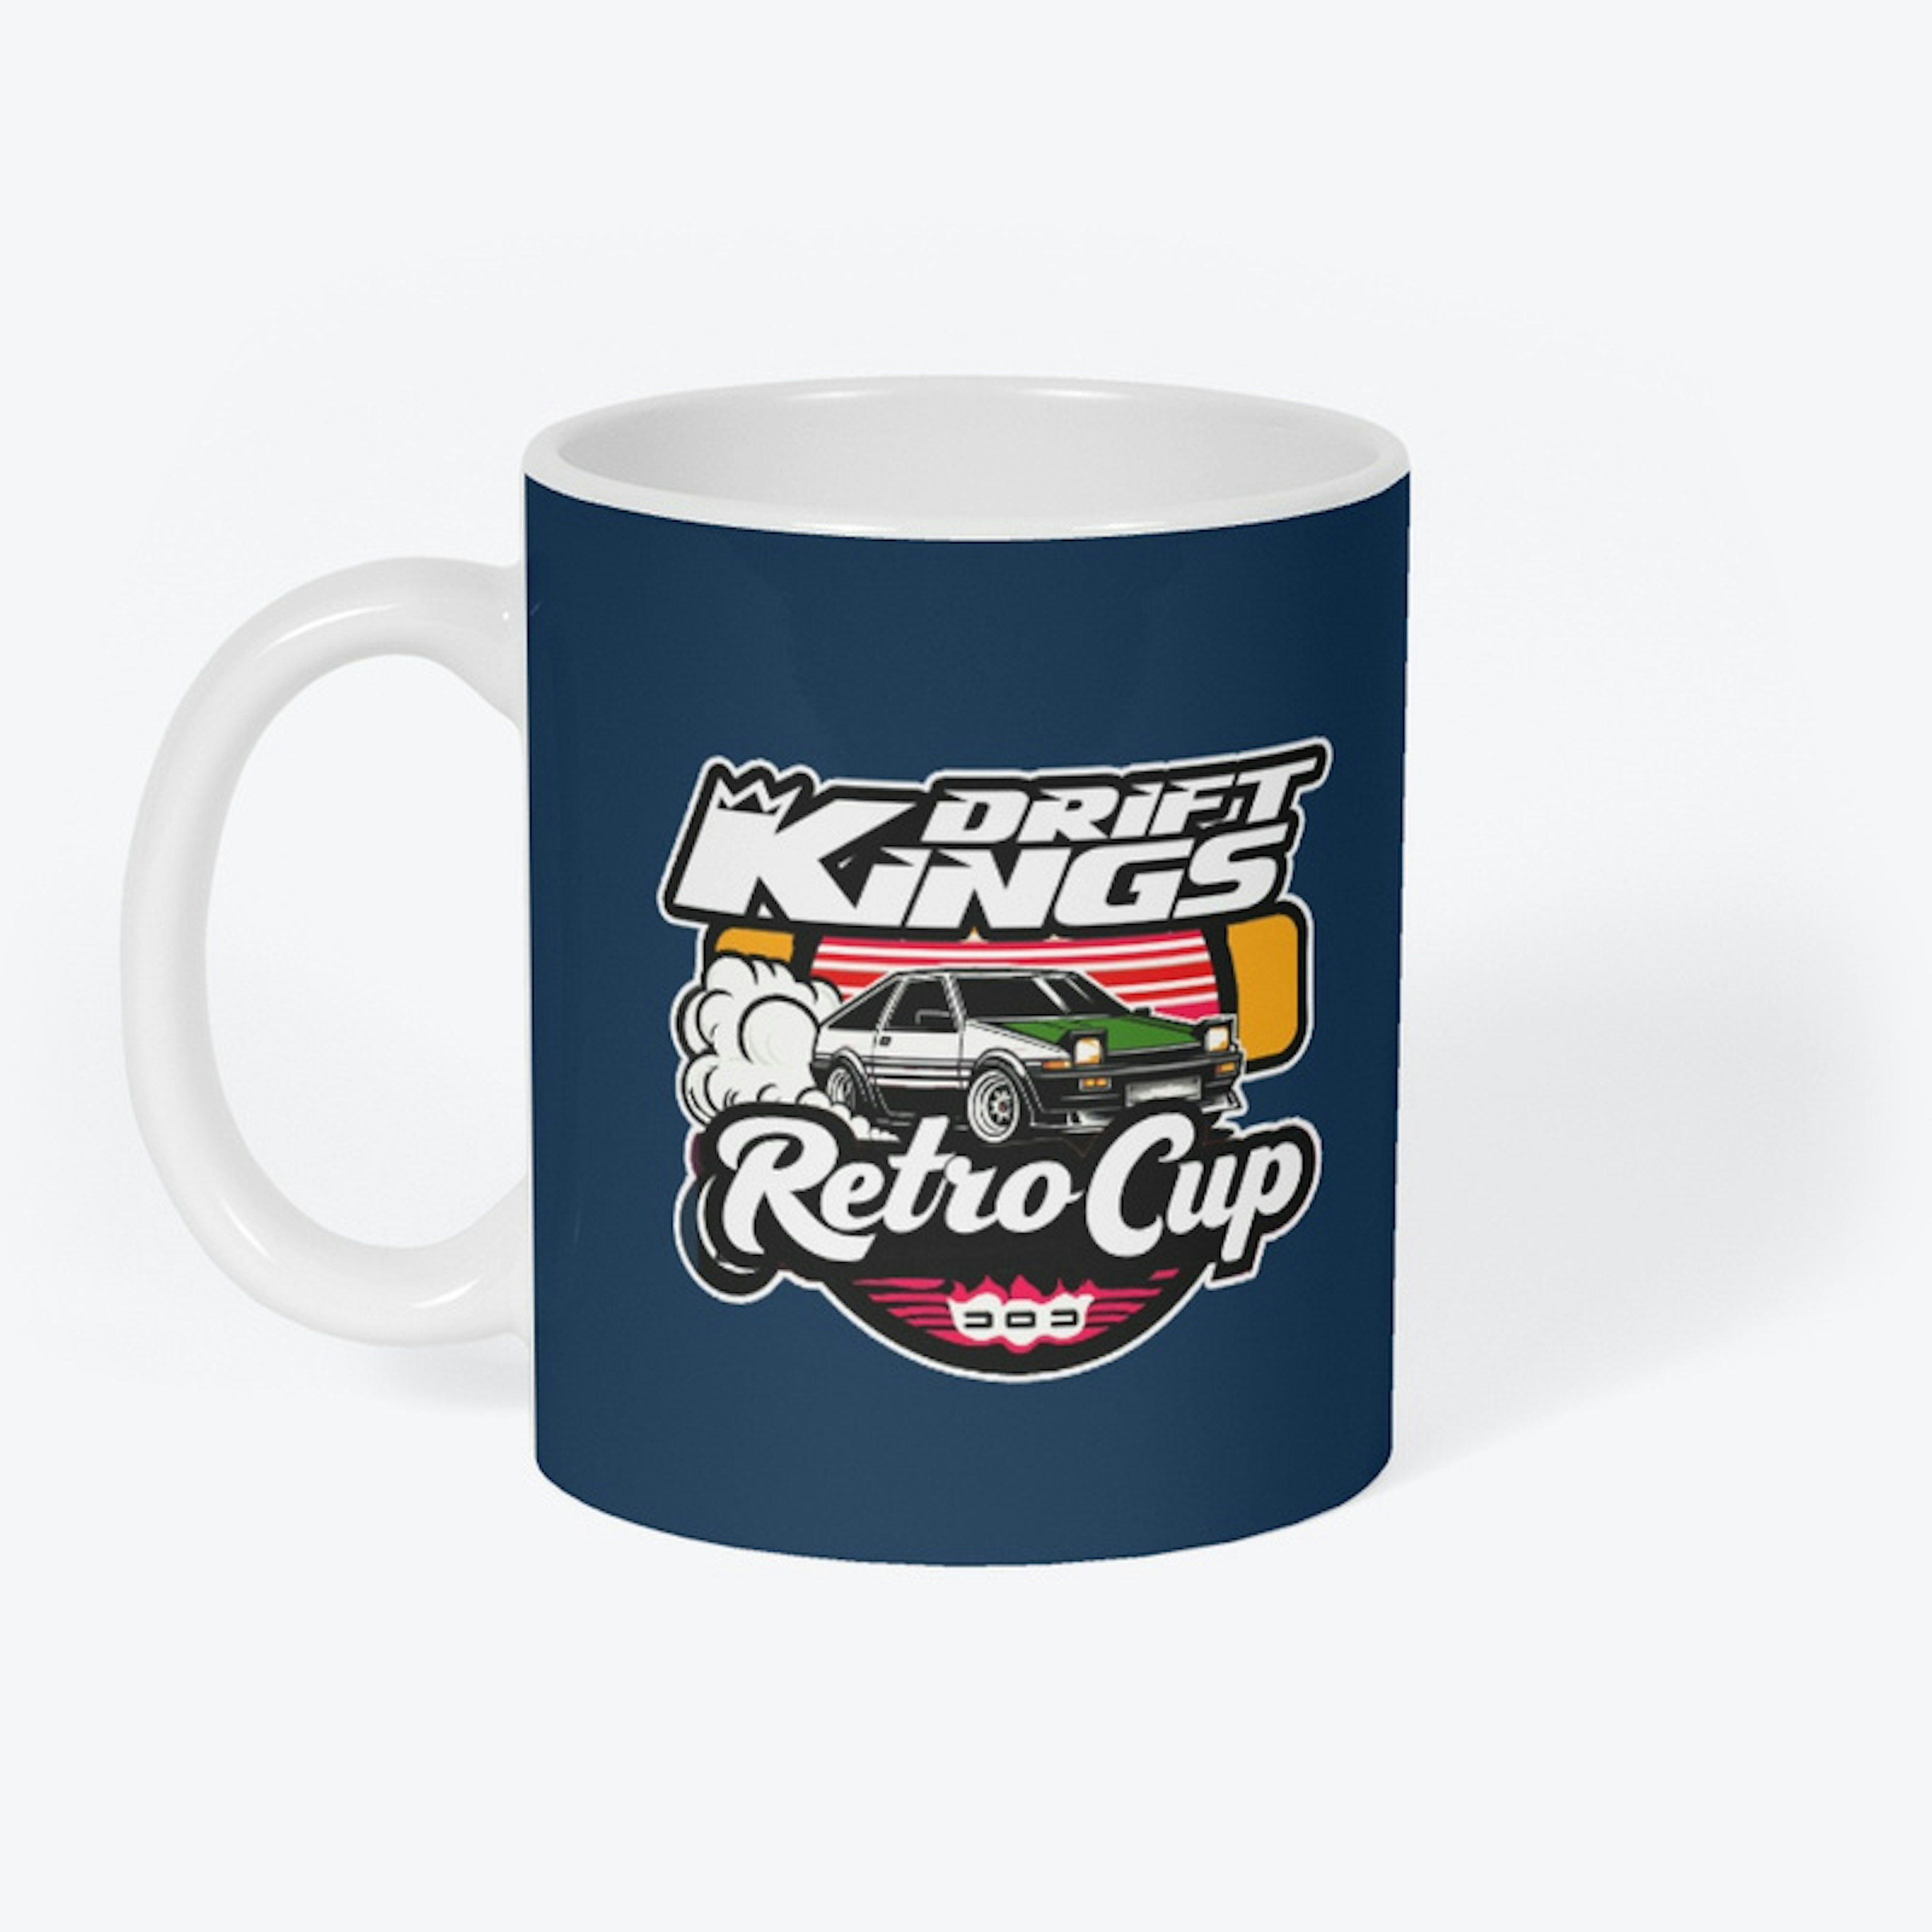 Retro Cup Collection